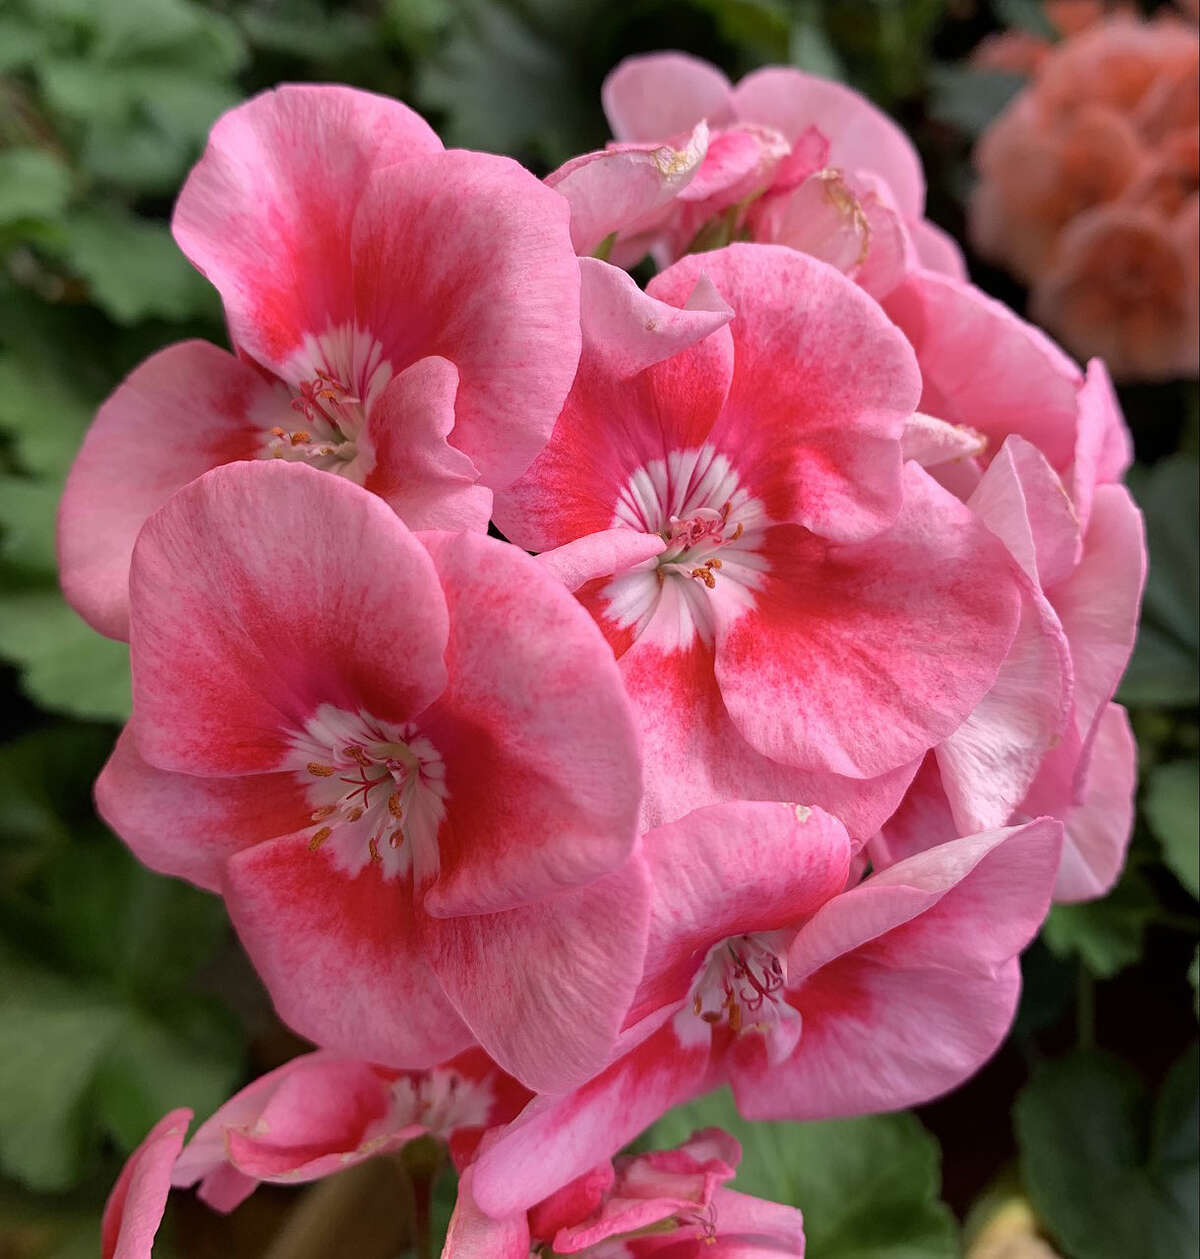 A blooming geranium brings a splash of warmth and color to a winter day.